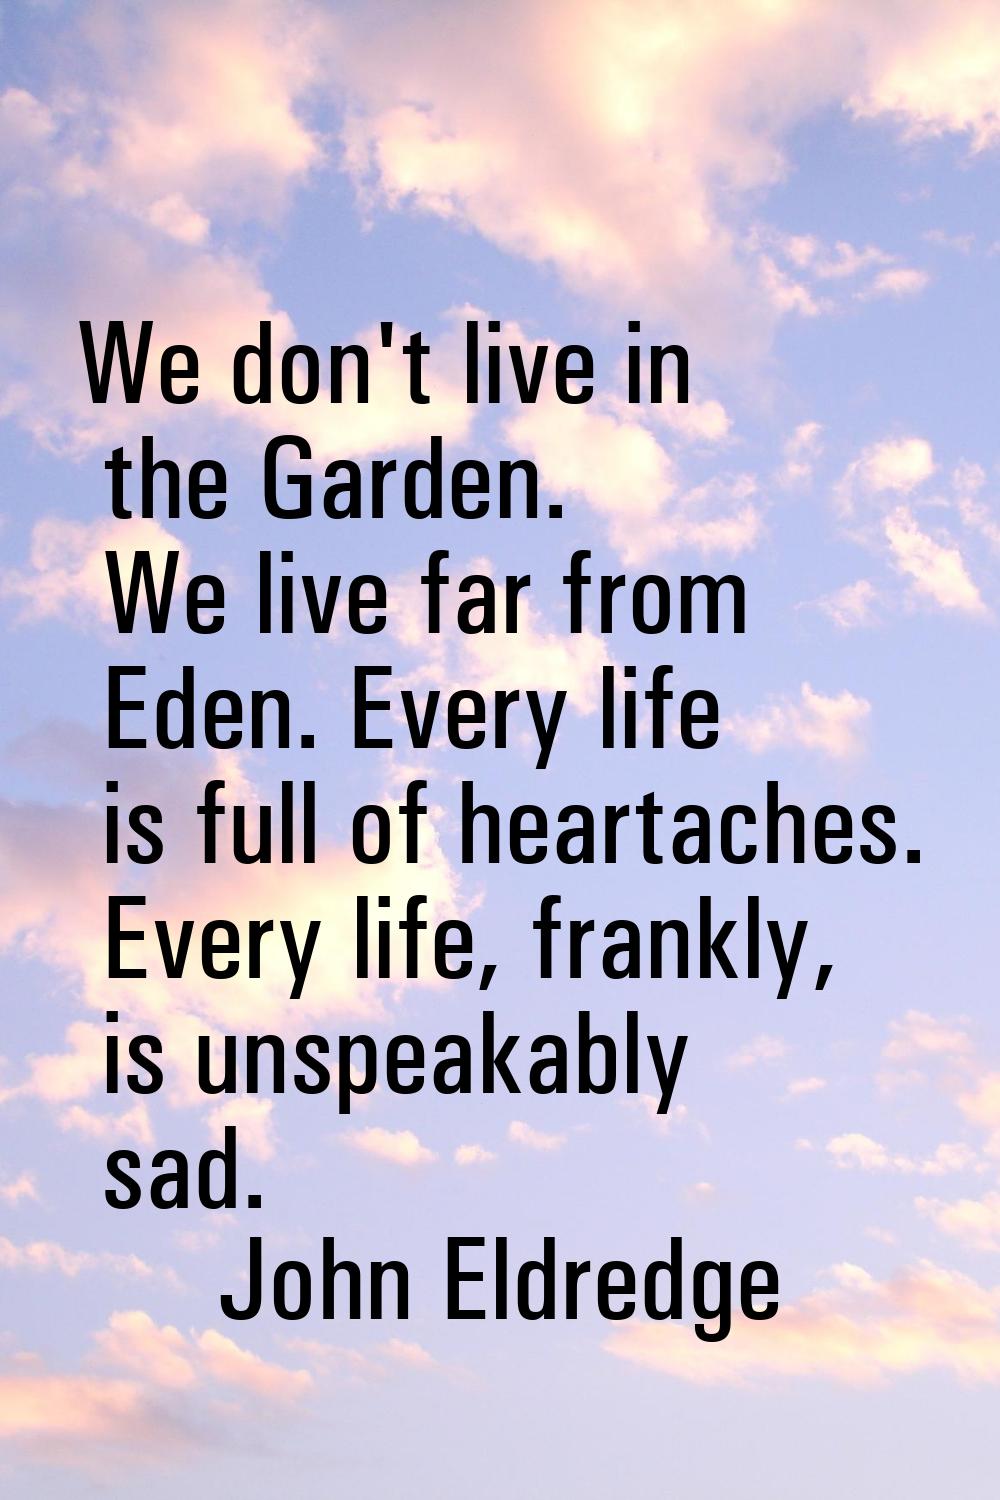 We don't live in the Garden. We live far from Eden. Every life is full of heartaches. Every life, f